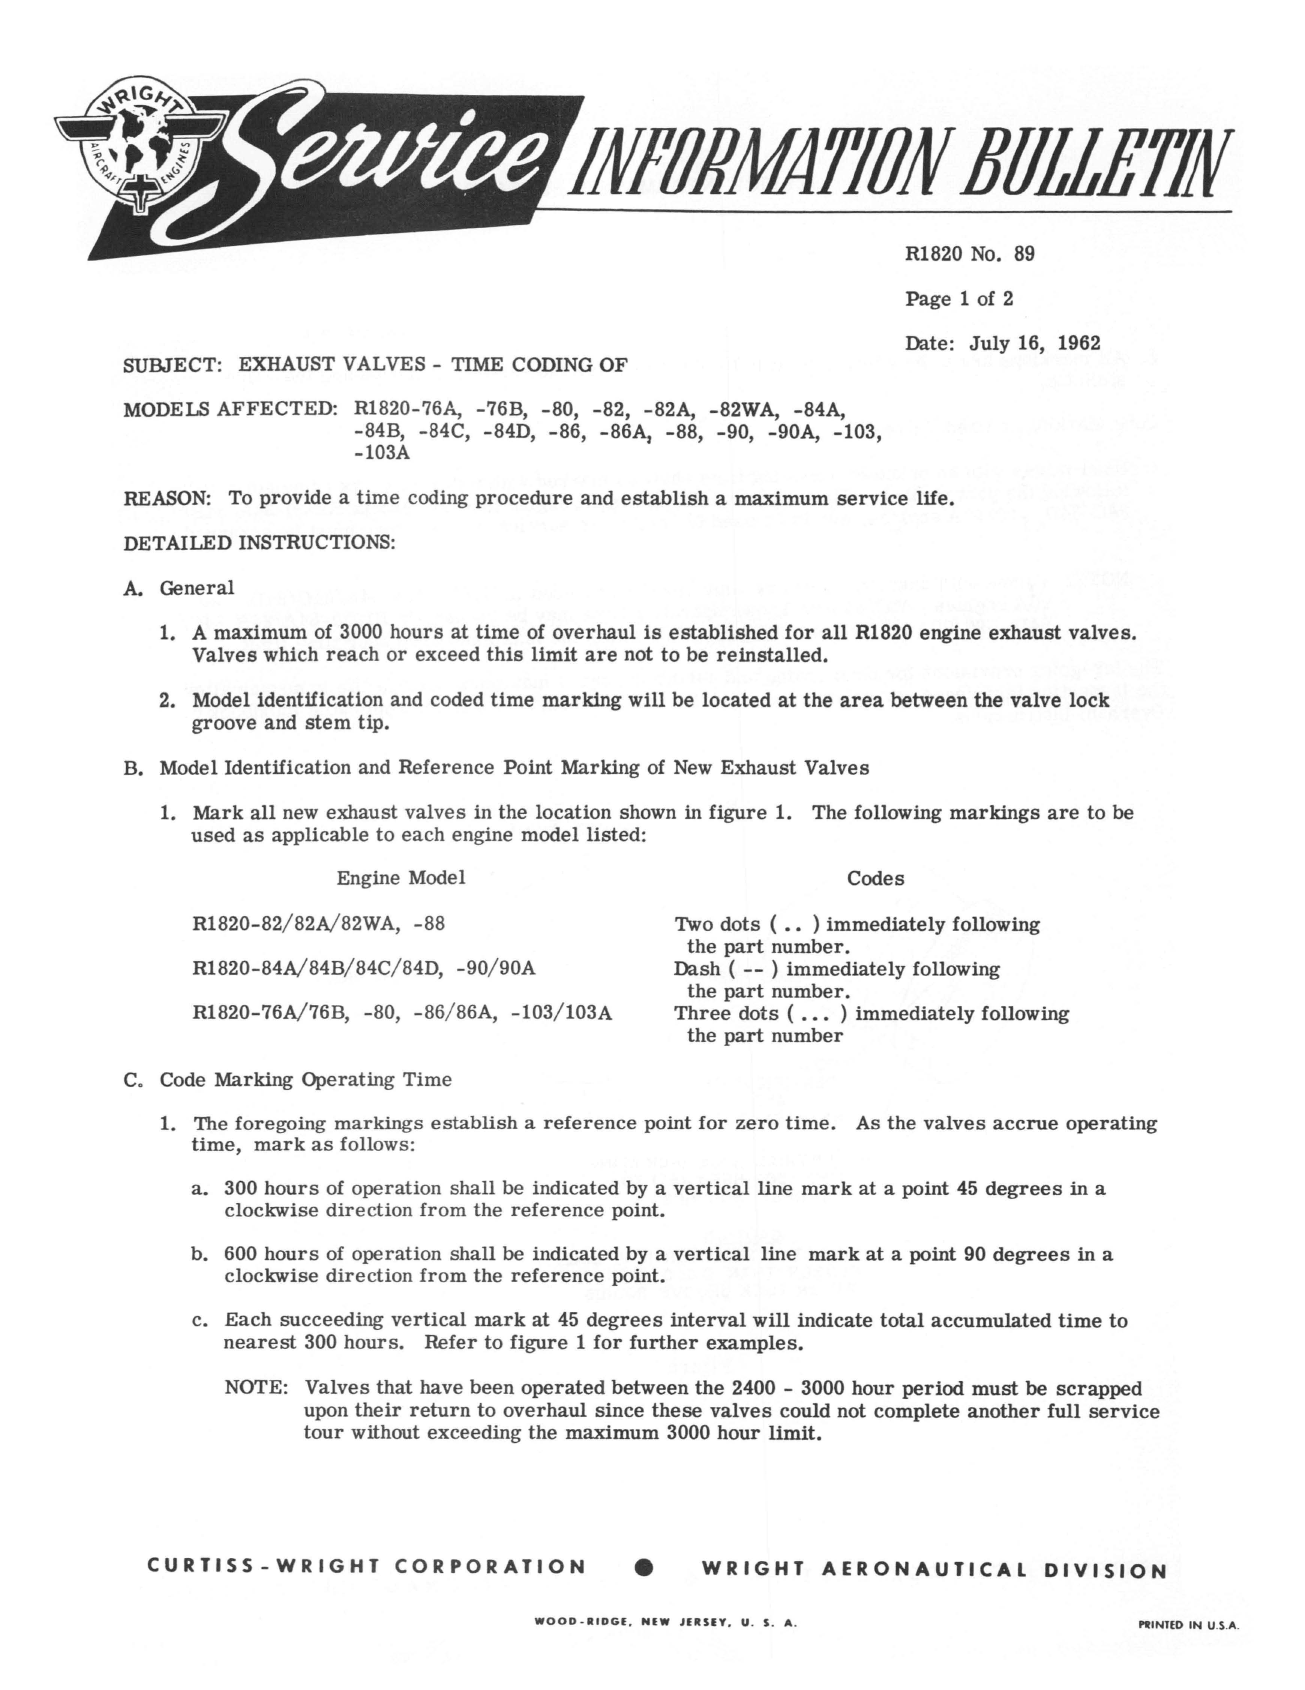 Sample page 1 from AirCorps Library document: Time Coding of Exhaust Valves